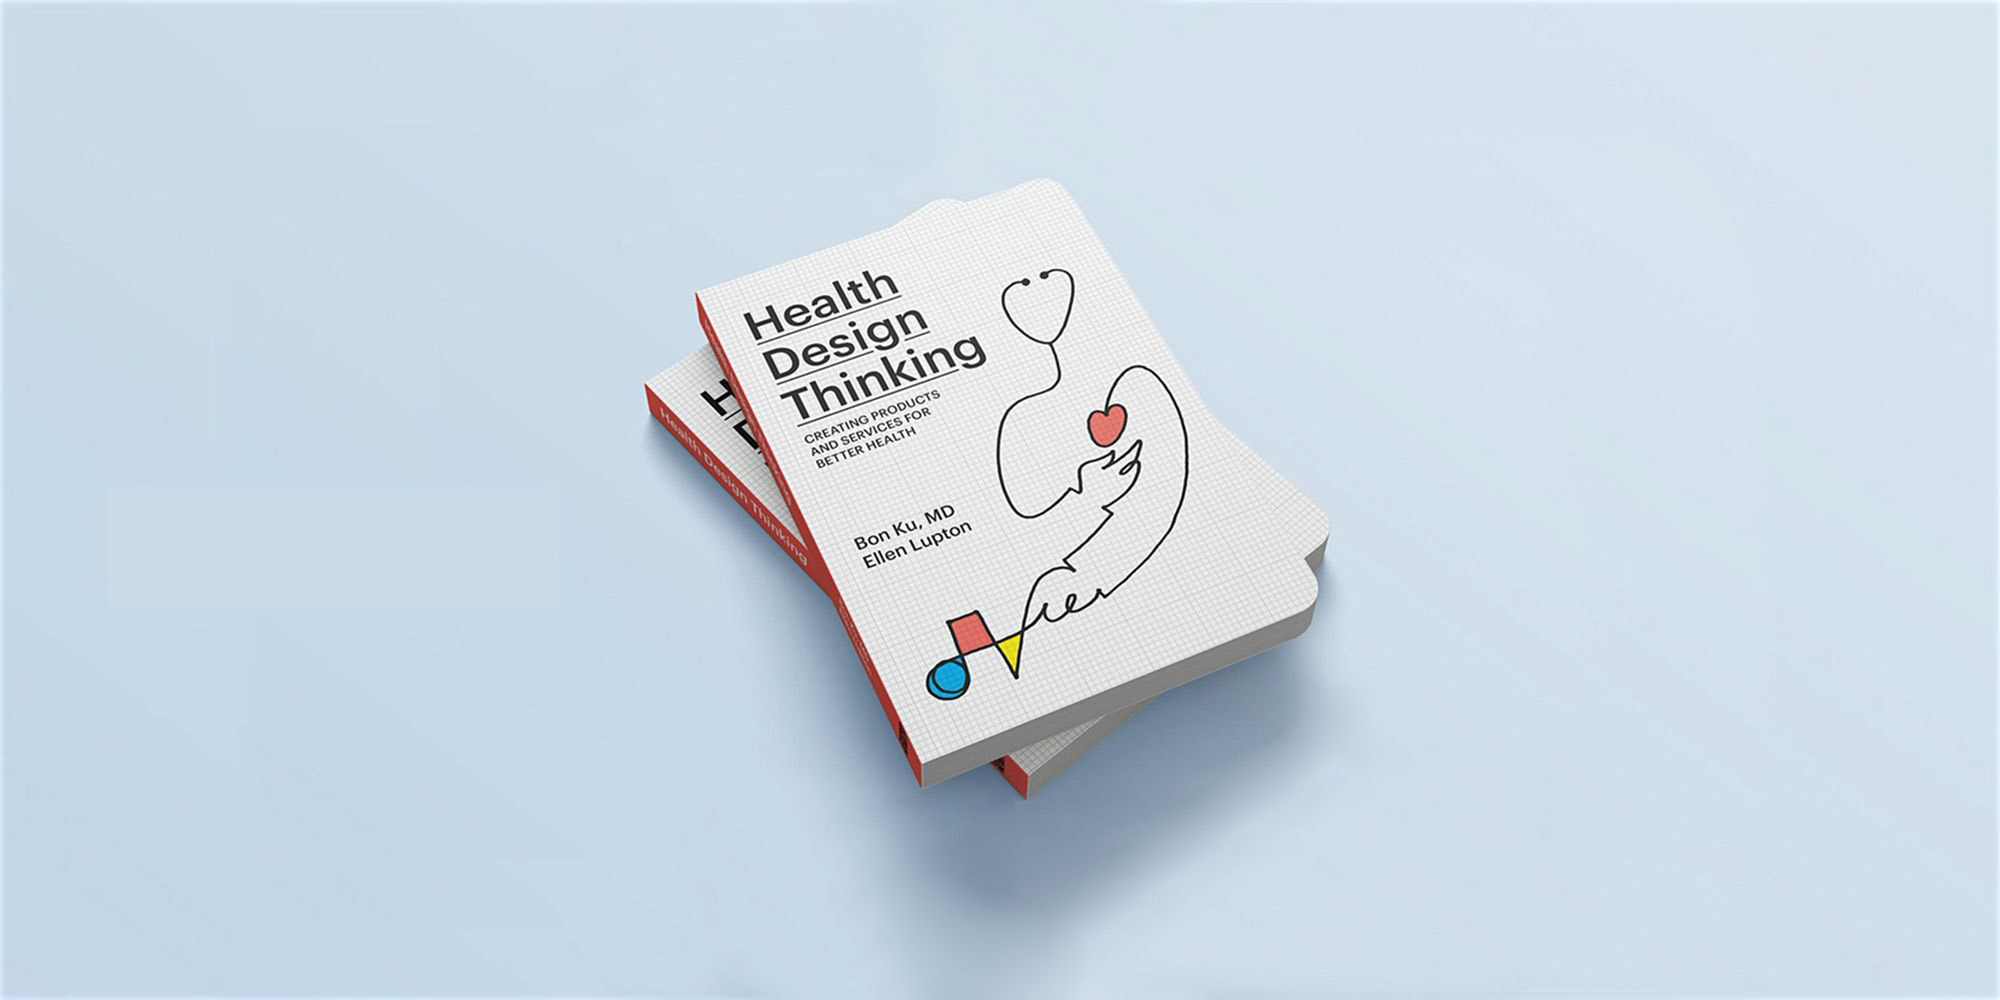 two copies of the book "Health Design Thinking," stacked on top of each other at slightly different angles, on a pale blue background.